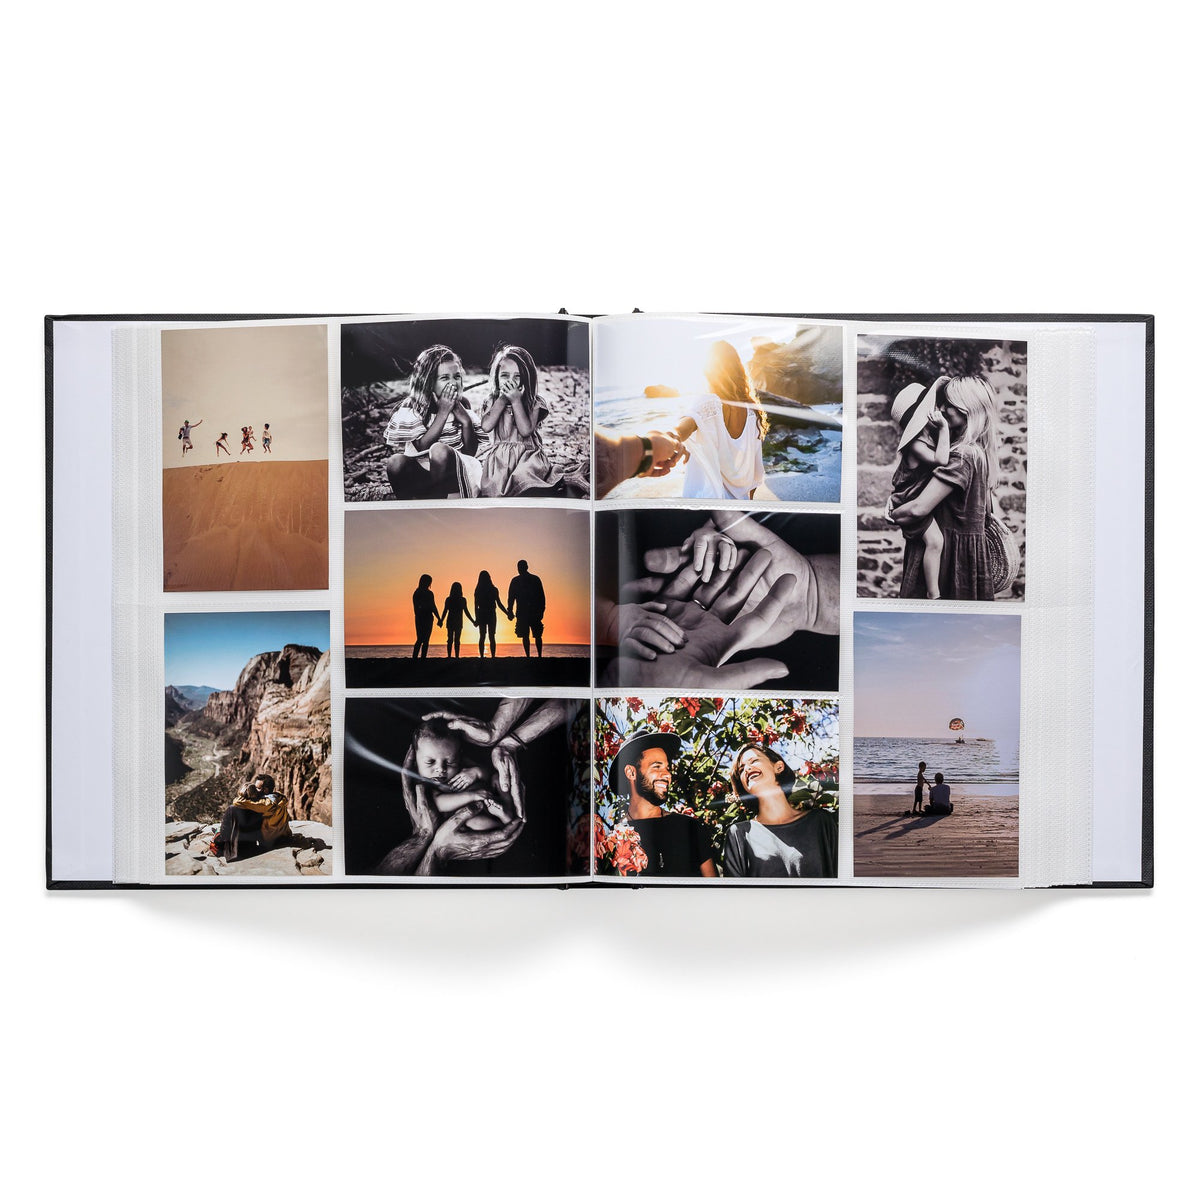 La Lente - Exquisite Handcrafted Leather Photo Books and Albums – Tagged  archival quality scrapbooks